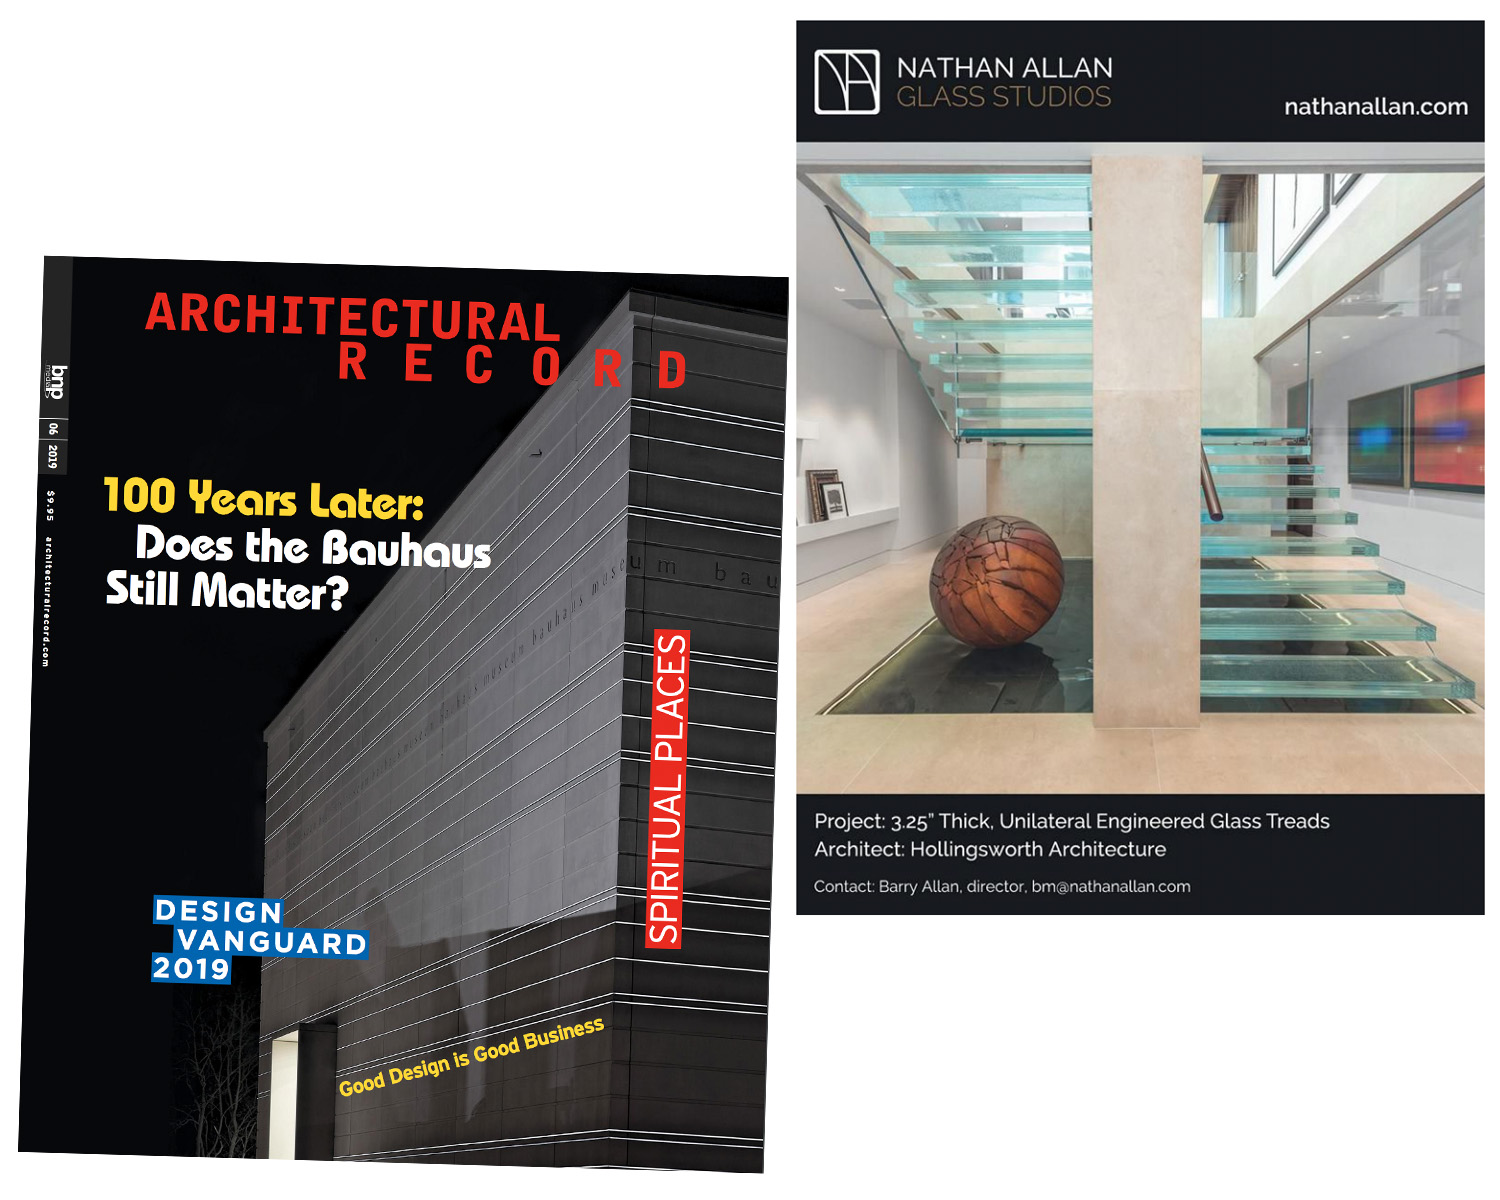 Architectural Record | Glass Stair Treads